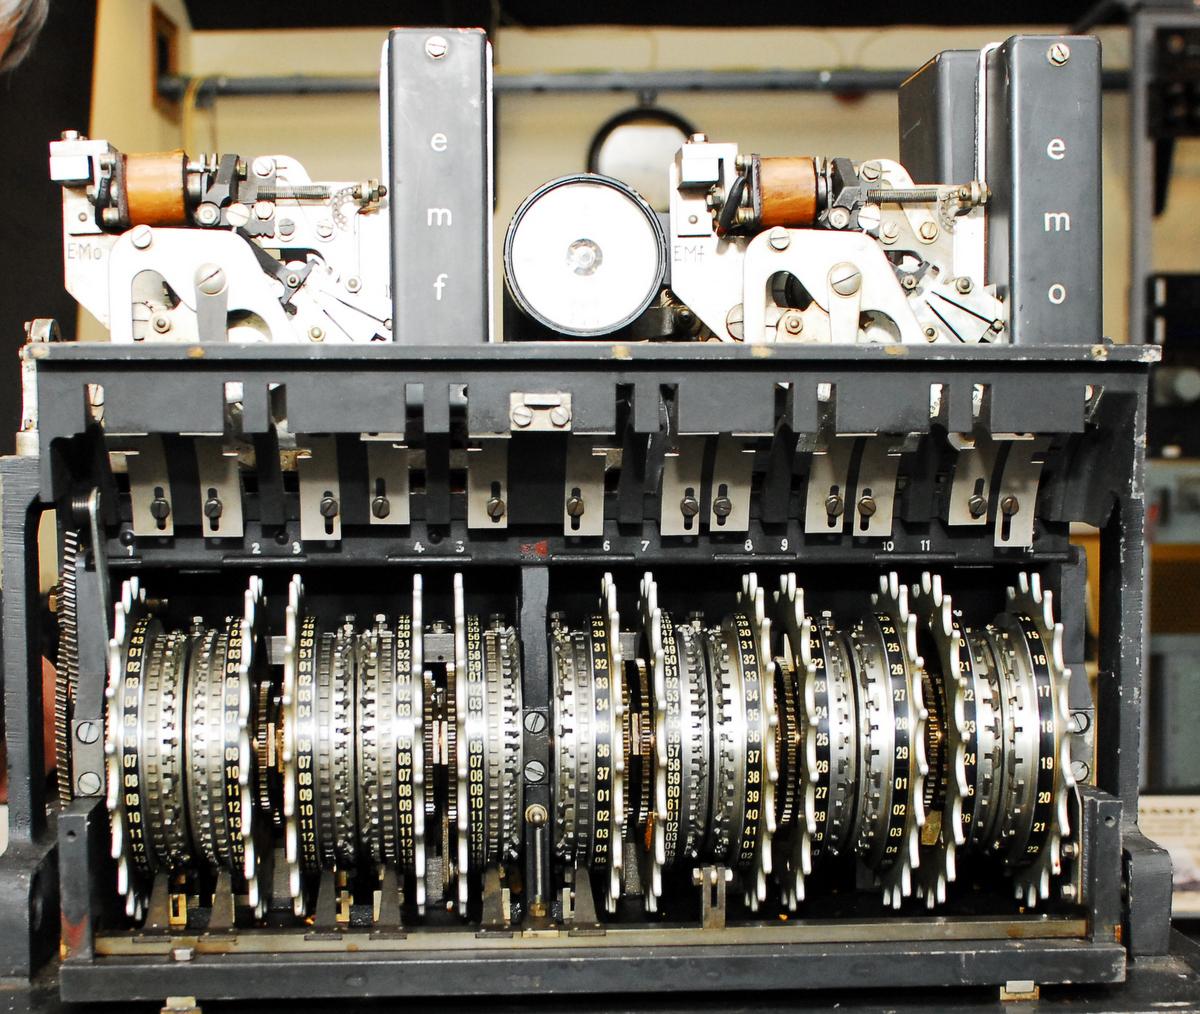 The Lorenz SZ42 encryption machine, which is currently on loan to the National Museum of Computing. It will be used with the teleprinter to give a demonstration of how the machine worked during WWII.